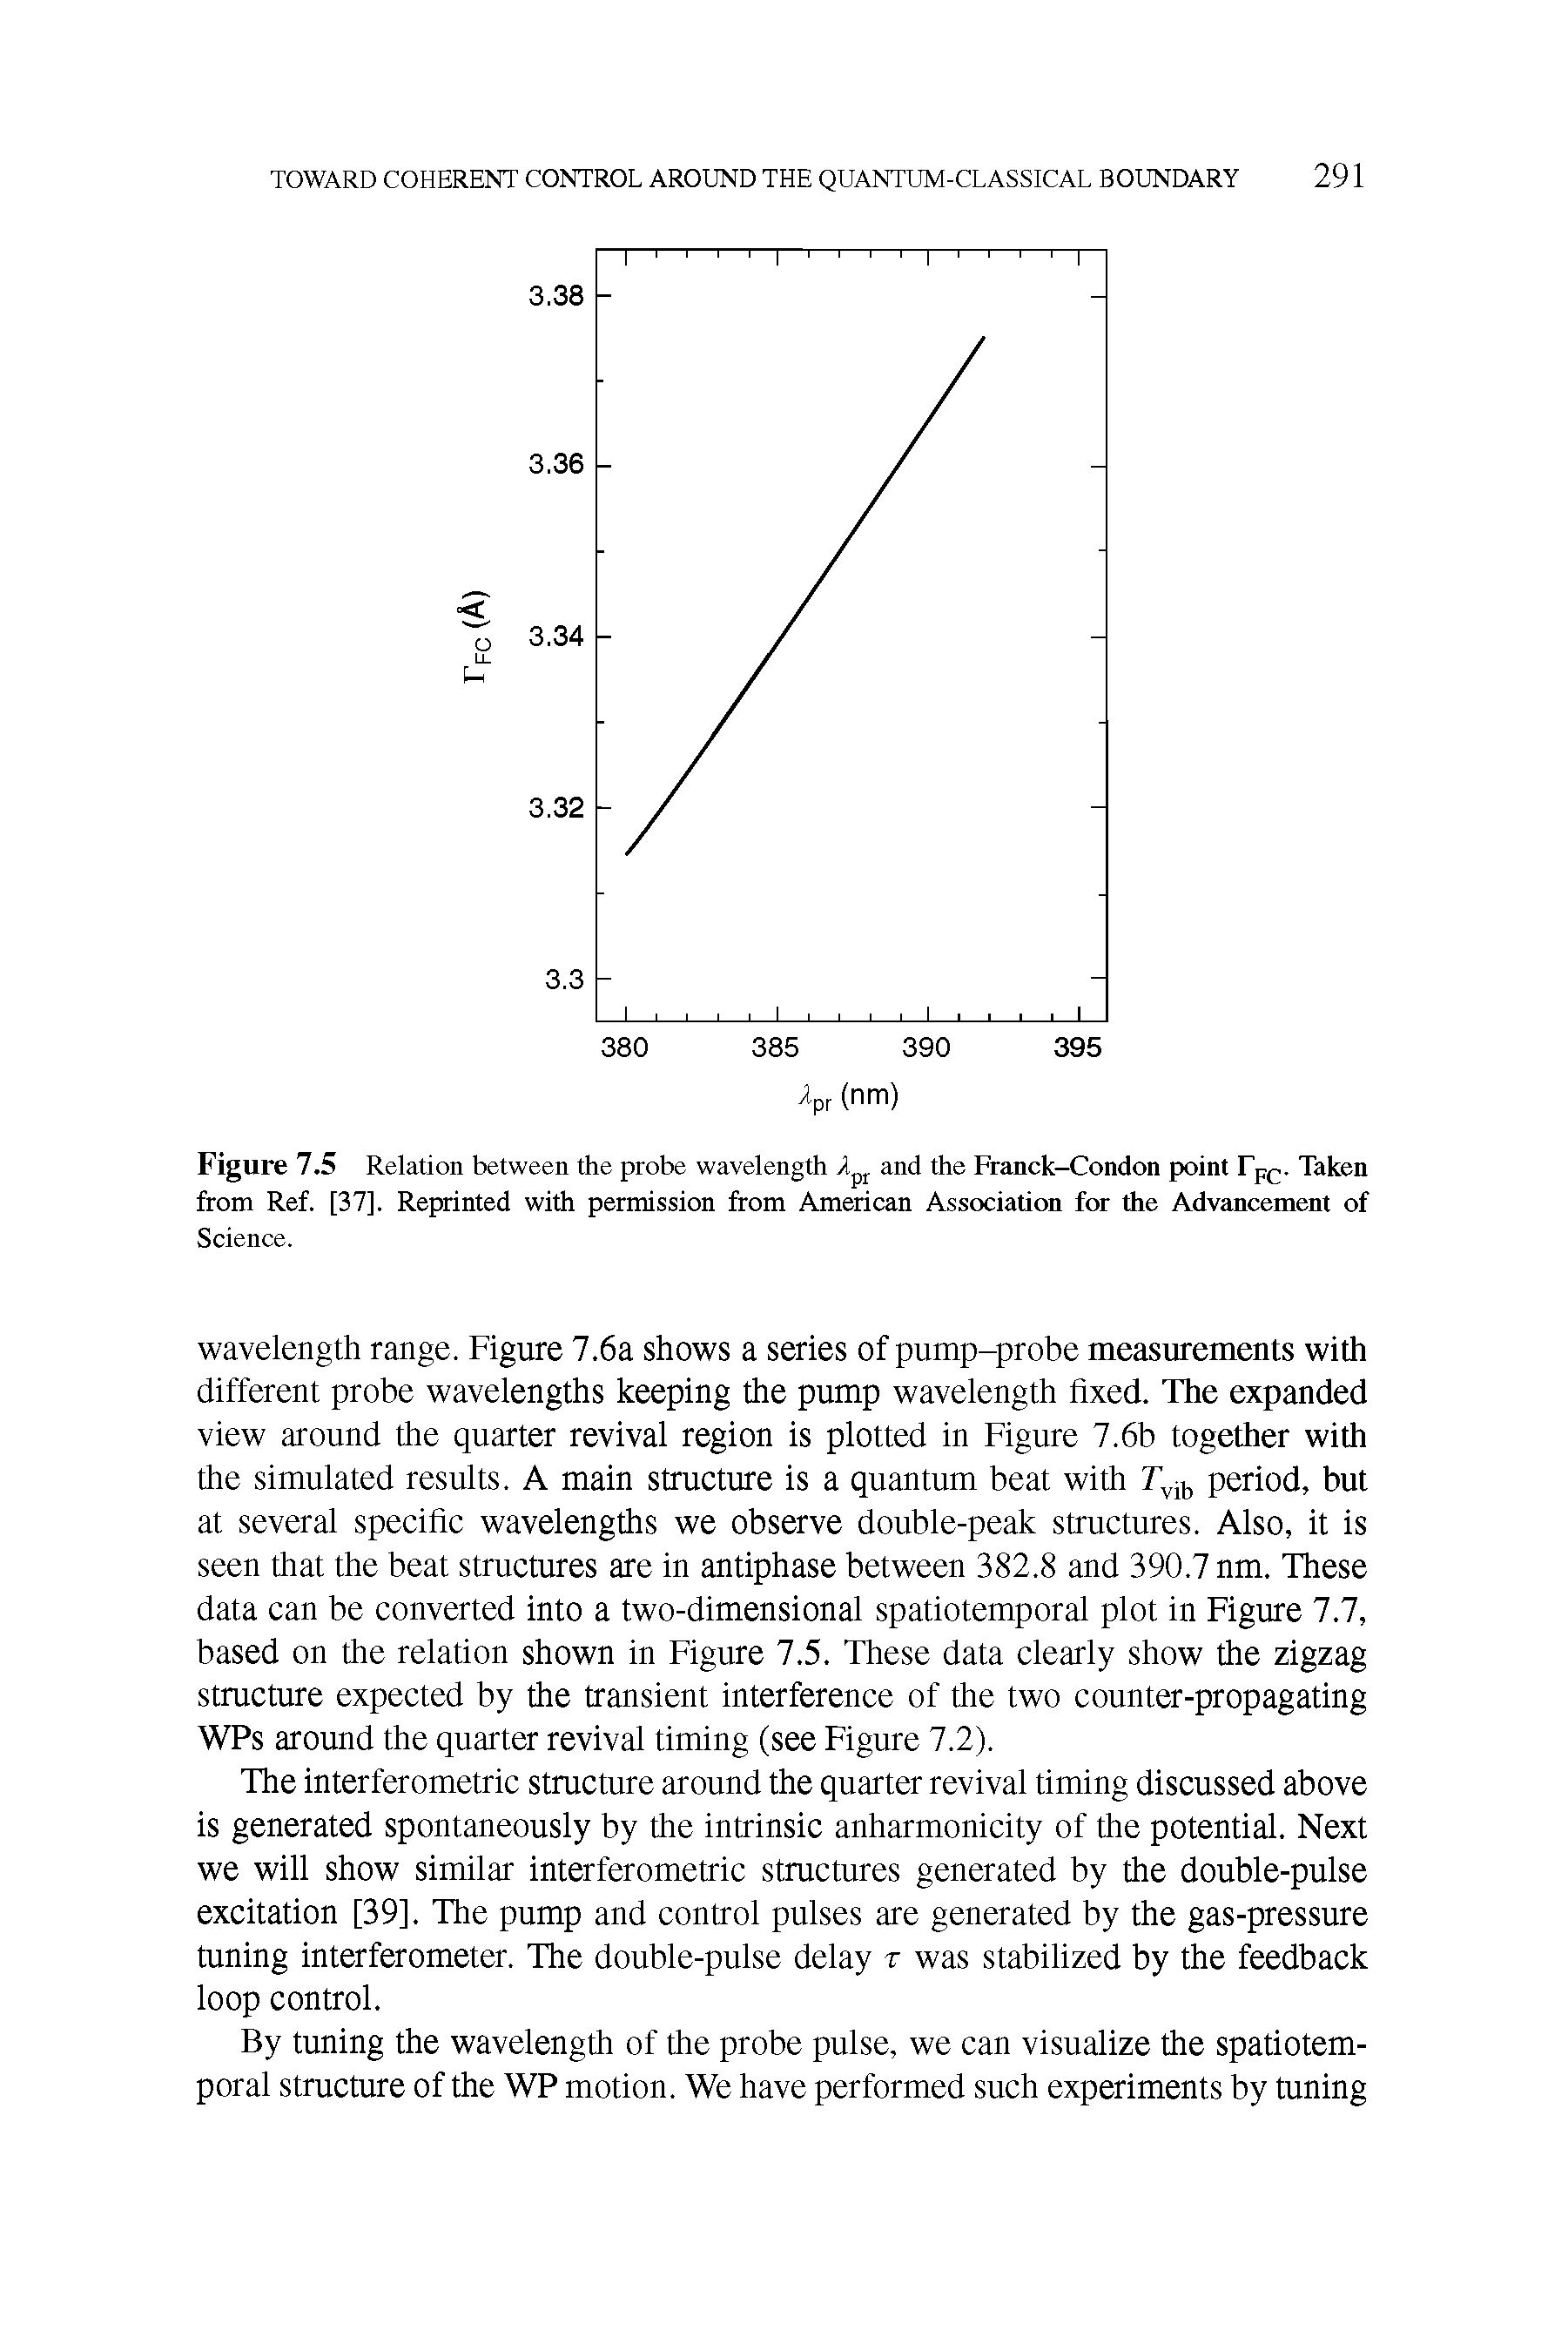 Figure 7.5 Relation between the probe wavelength and the Franck—Condon point Taken from Ref. [37]. Reprinted with permission from American Association for the Advancement of Science.